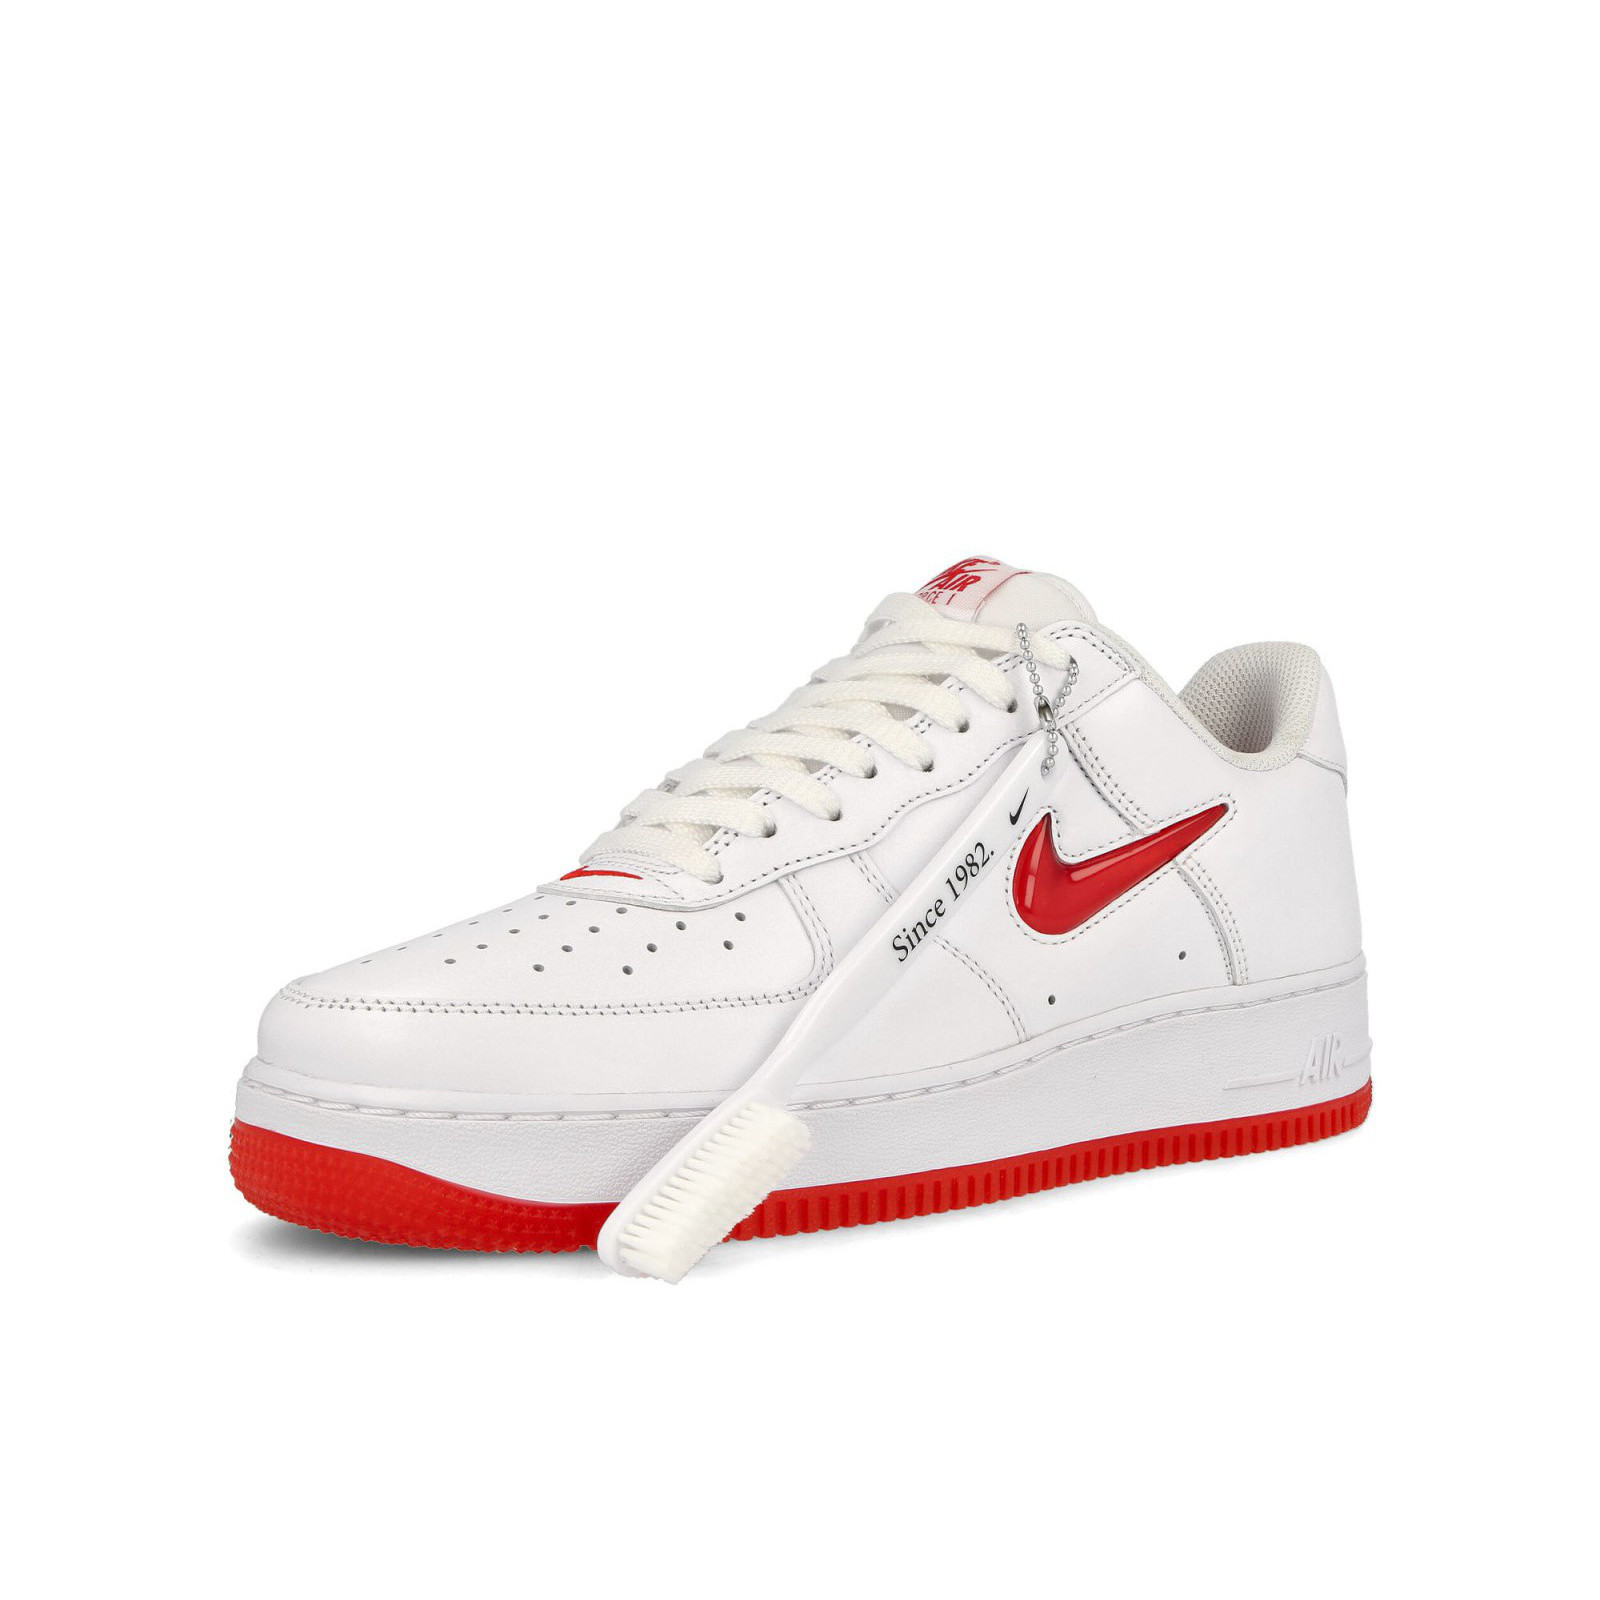 Nike Air Force 1 Low Retro
« Color of the Month »